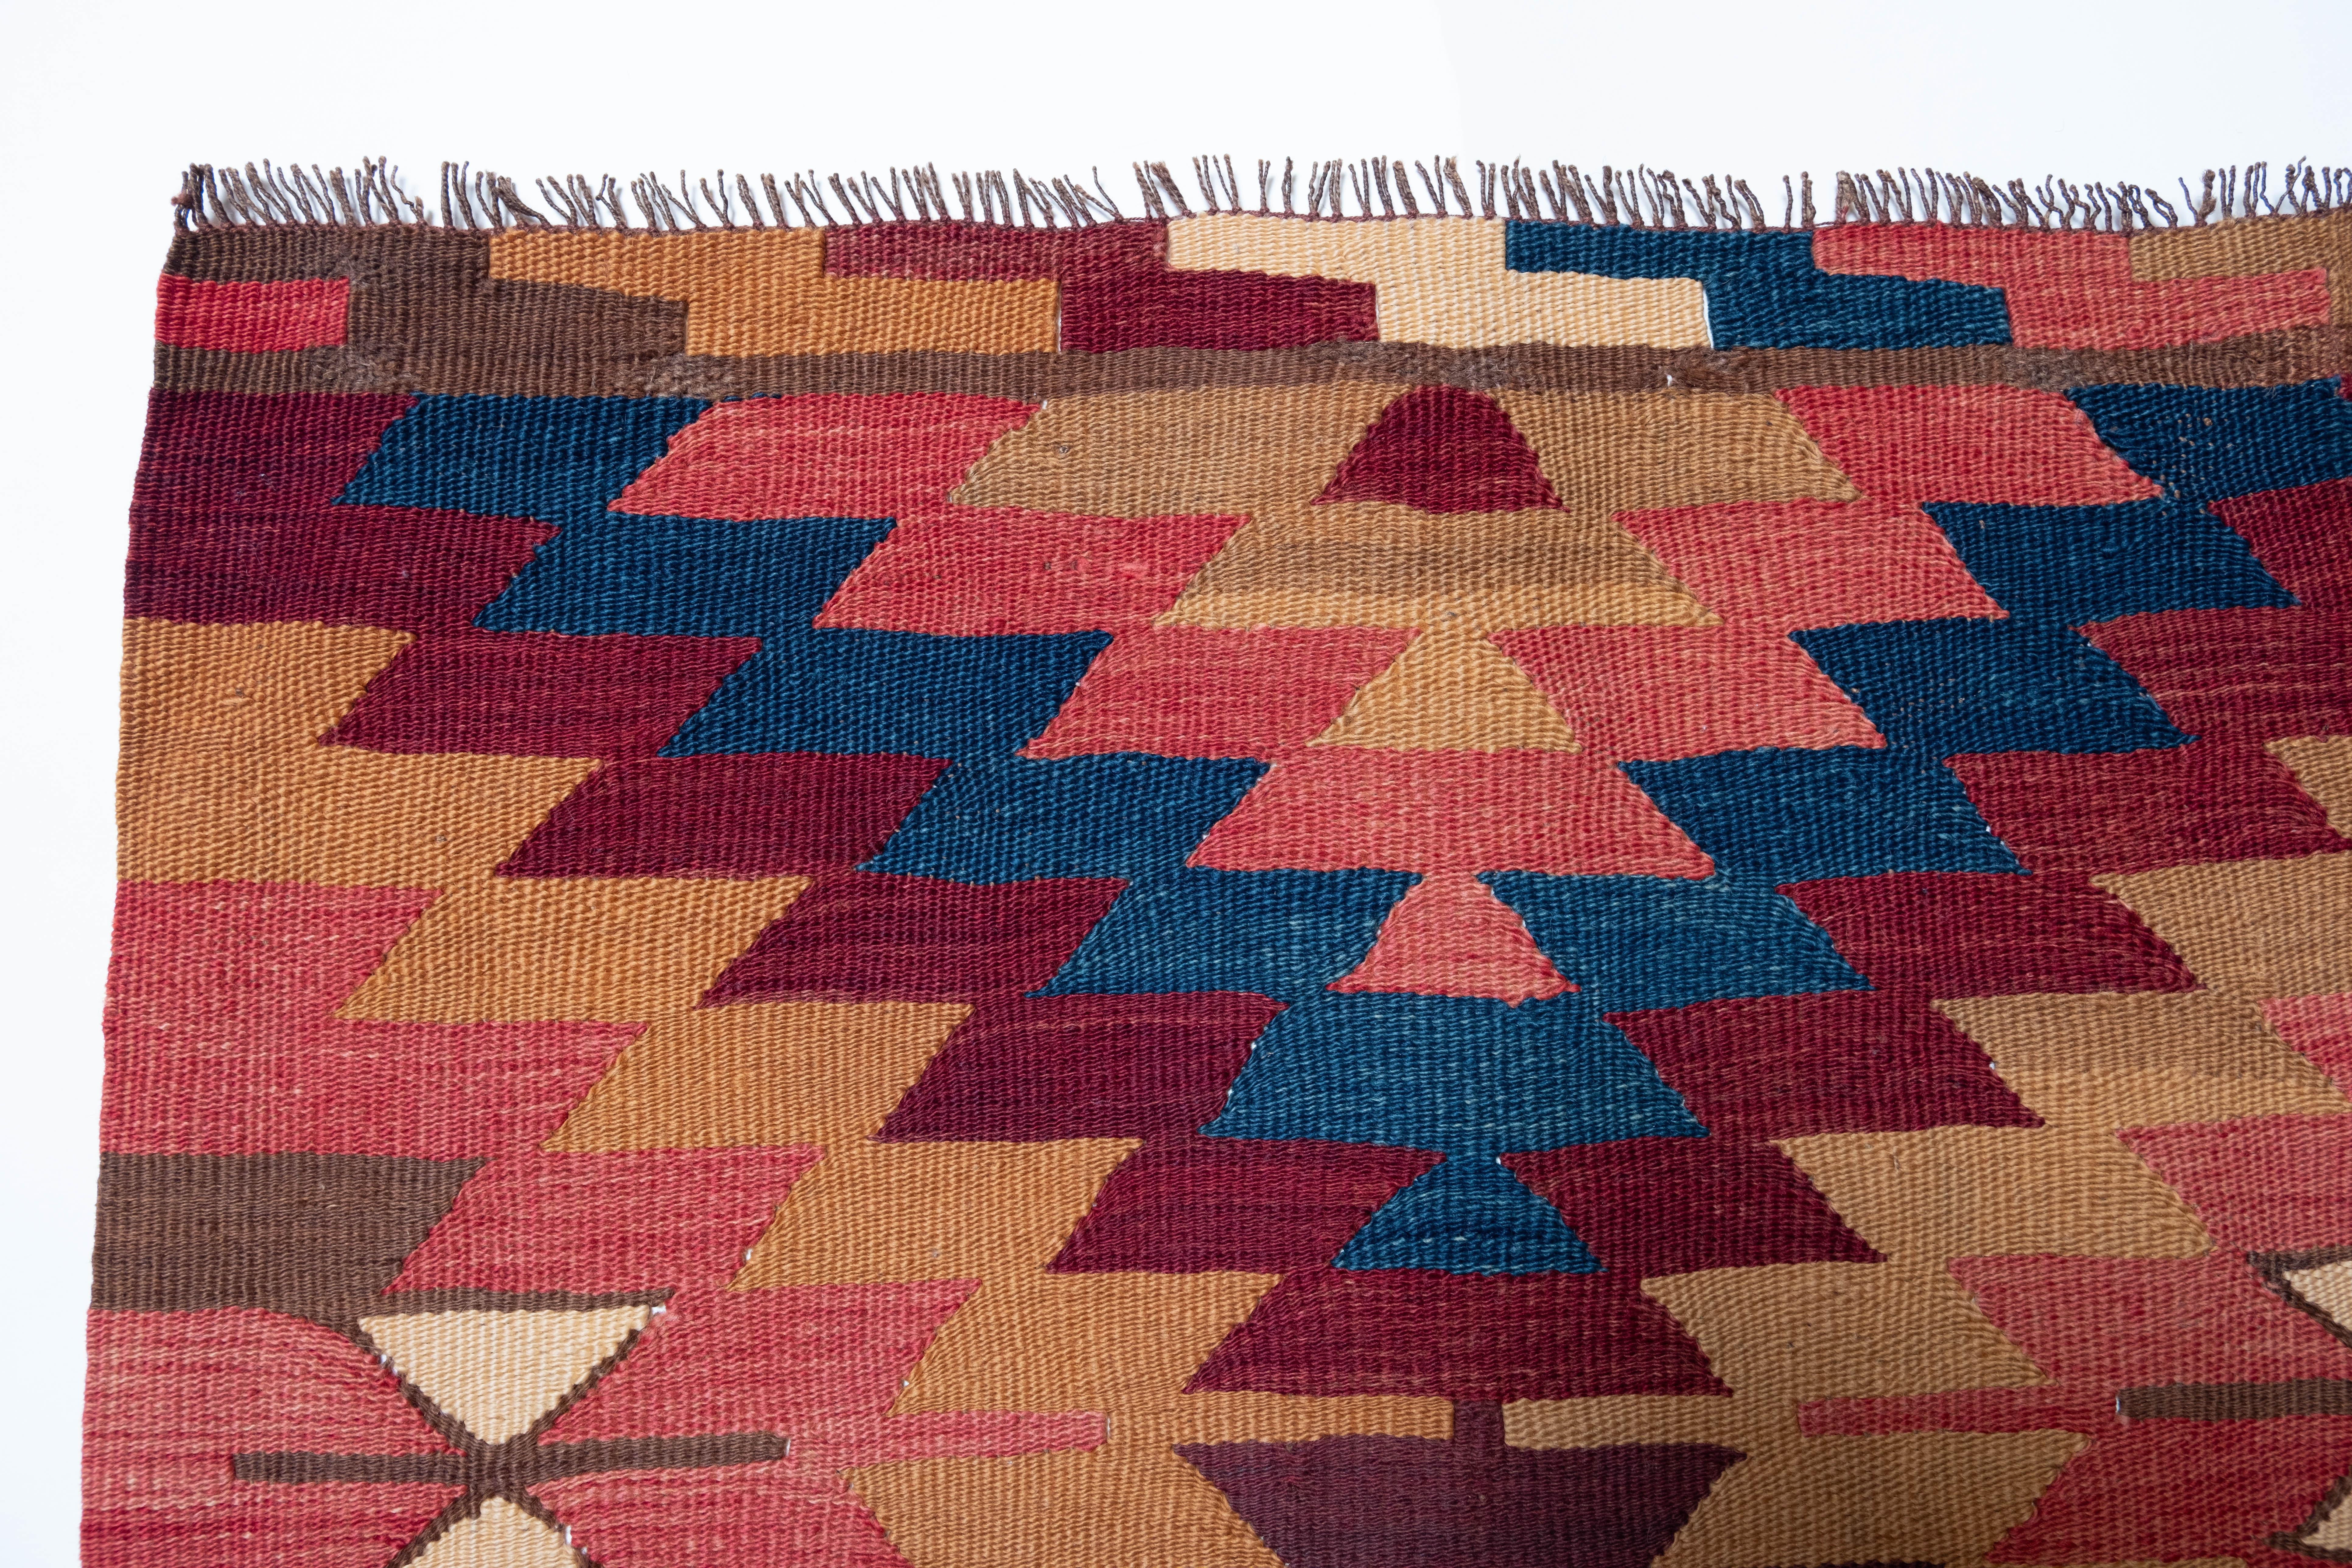 This is Northwest Anatolian Antique Kilim from the Manastir region with a rare and beautiful color composition.

This kilim is chic and natural yet has the most beautiful combination of vibrant dyed colors. Each dyed color is deep and calm, yet